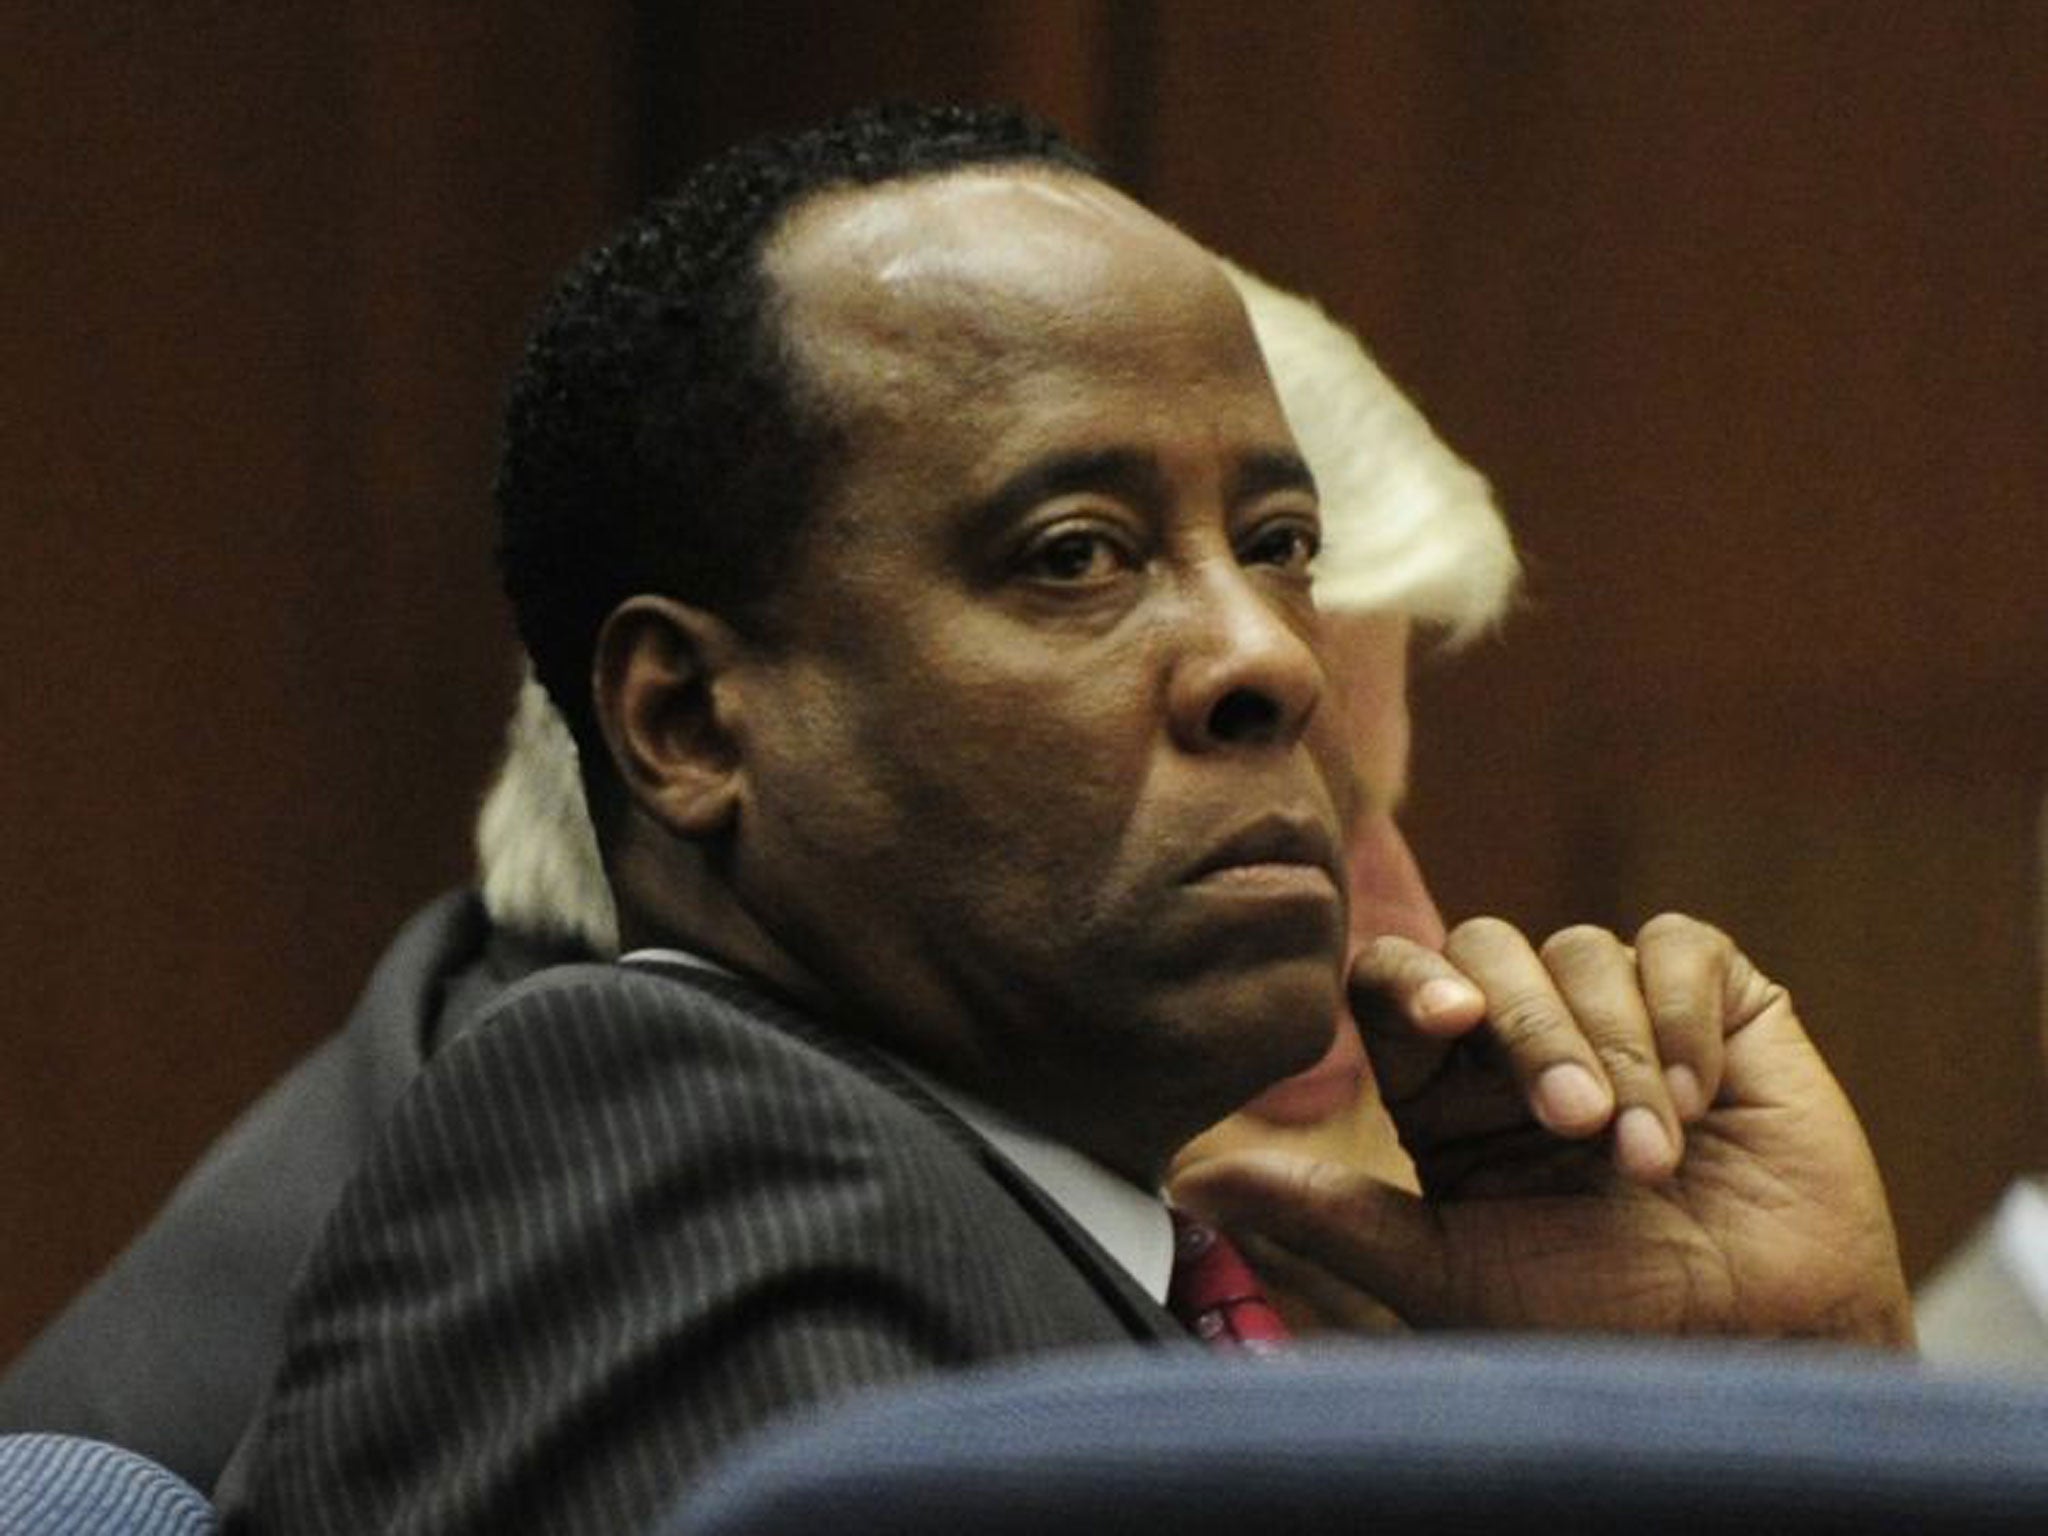 Conrad Murray was given four years in jail for manslaughter